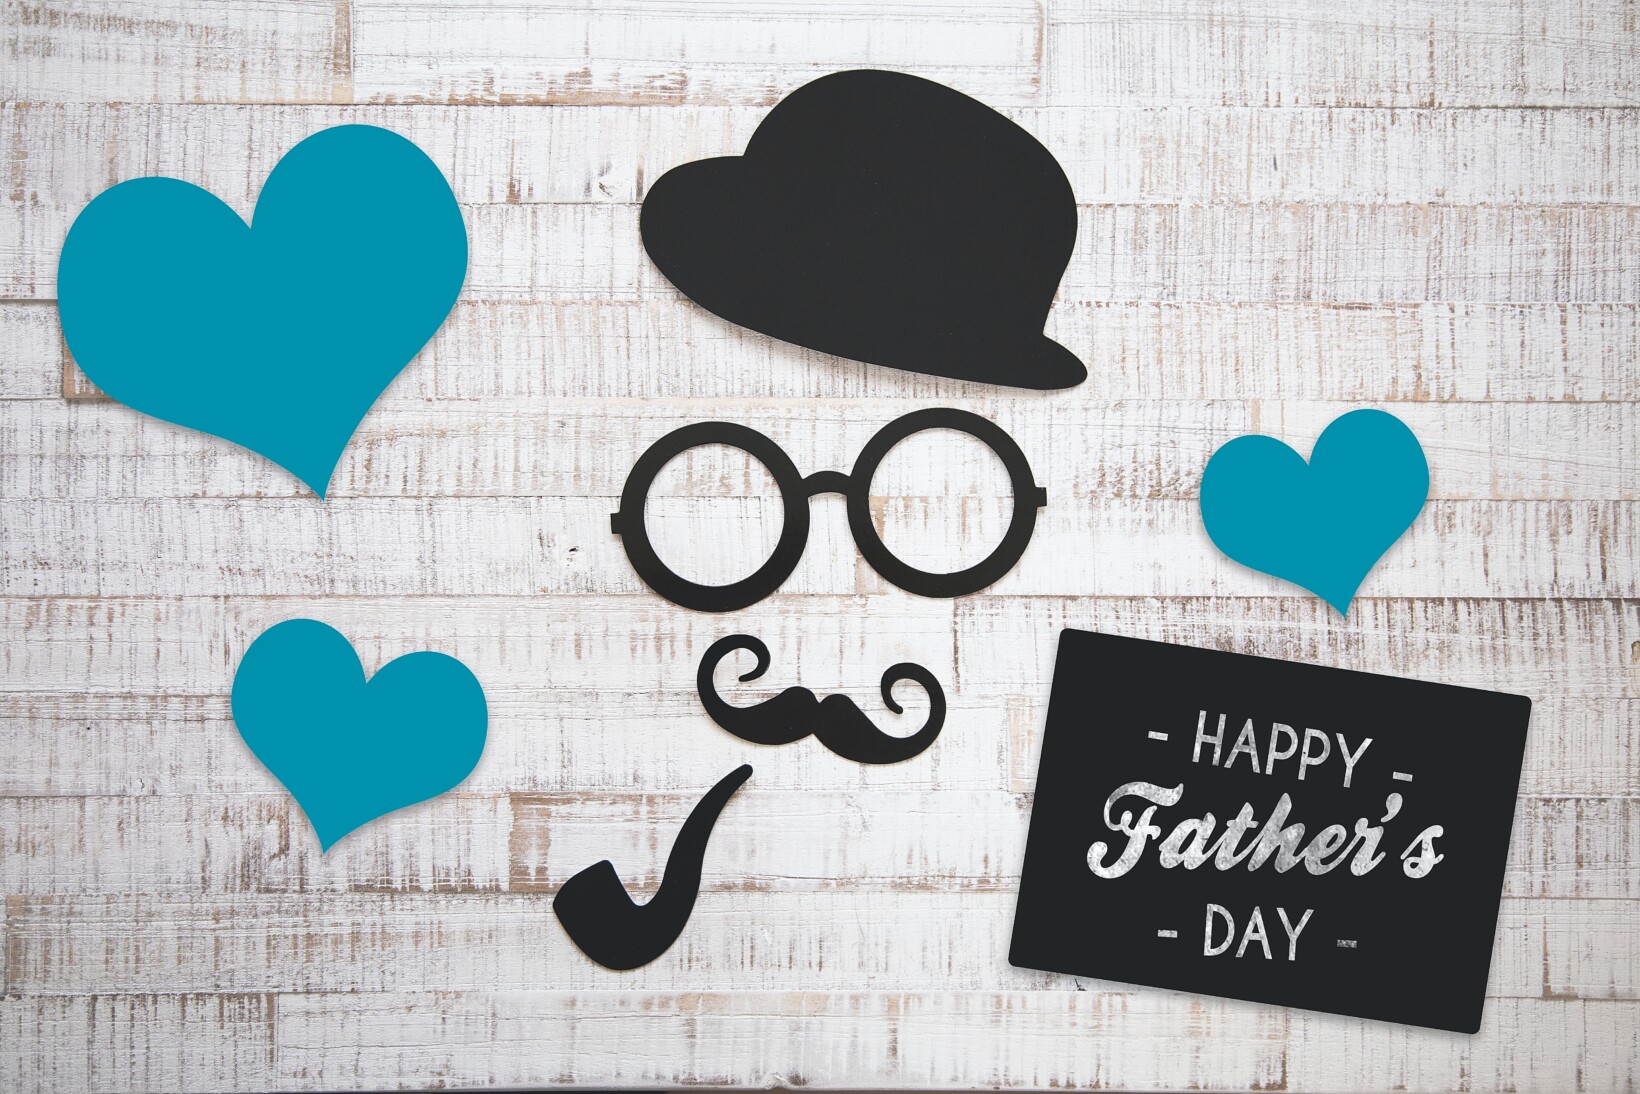 Paper cutouts of top hat, glasses, mustache and pipe to represent dads on Father's Day.